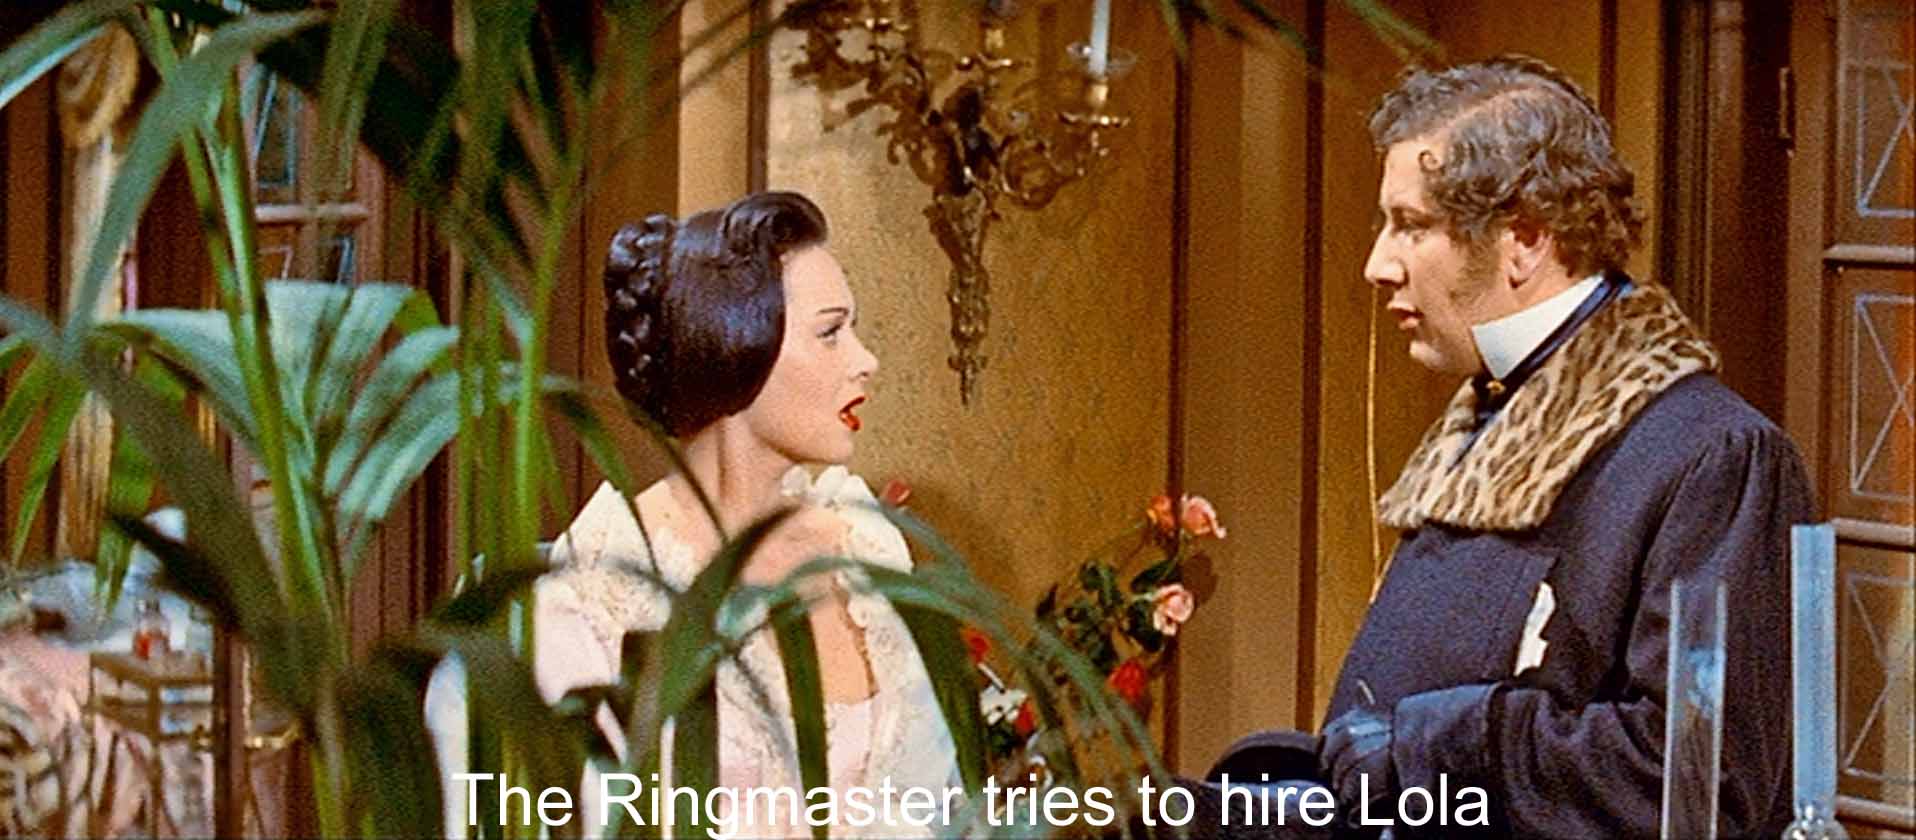 The Ringmaster tries to hire Lola